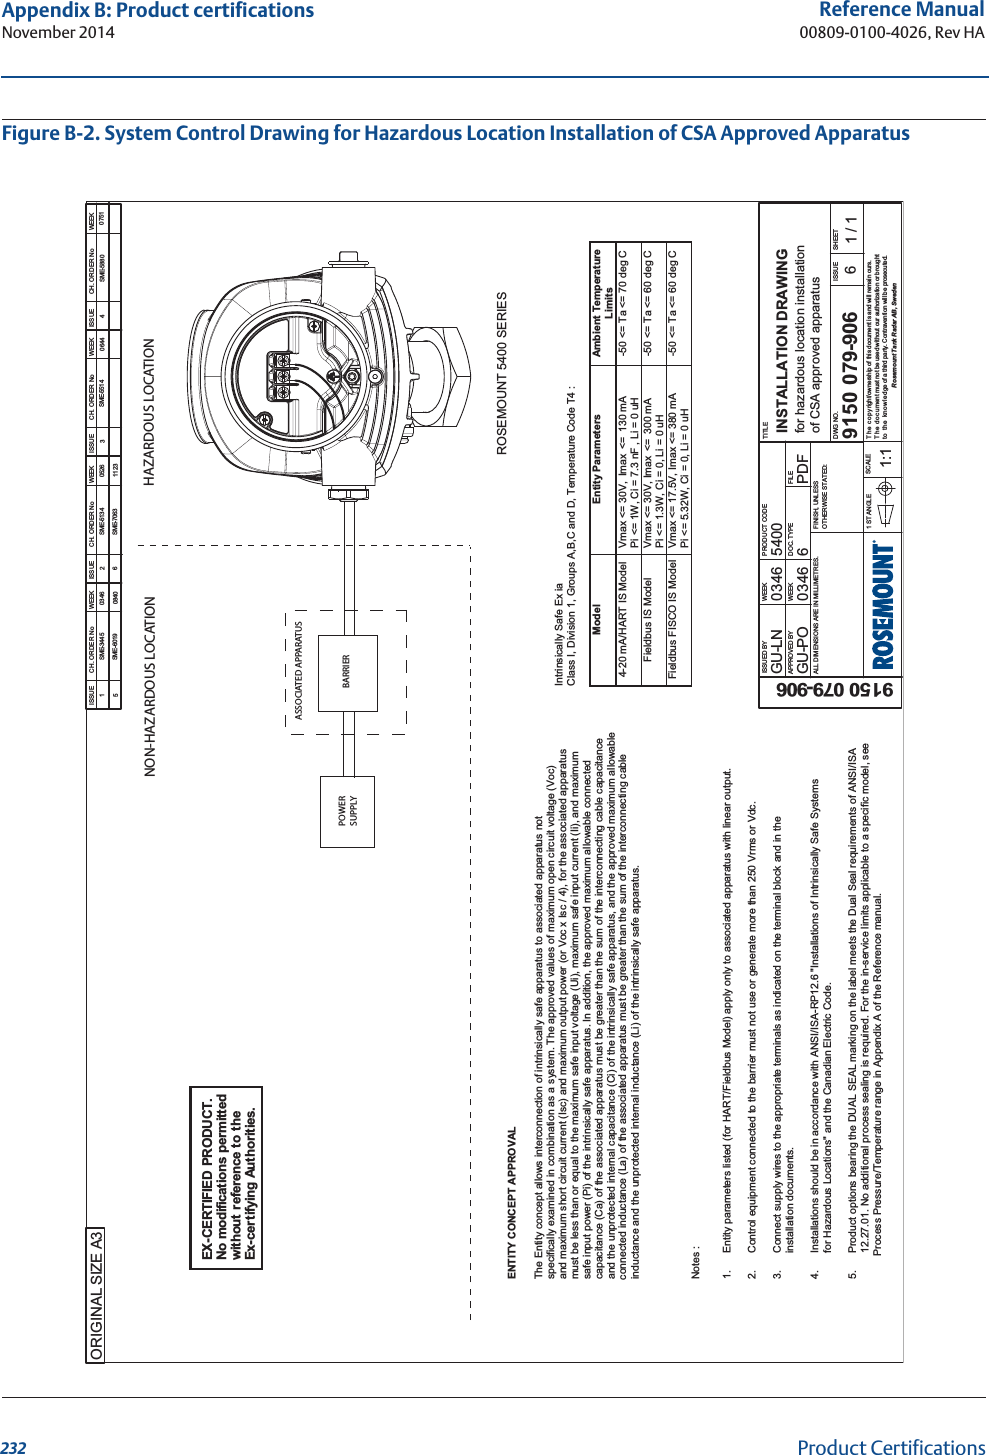 232Reference Manual00809-0100-4026, Rev HAAppendix B: Product certificationsNovember 2014Product CertificationsFigure B-2. System Control Drawing for Hazardous Location Installation of CSA Approved ApparatusSME-3445   0346   1  ISSUE CH. ORDER No WEEK ISSUE CH. ORDER No WEEK ISSUE CH. ORDER No WEEK ISSUE CH. ORDER No WEEKA3ORIGINAL SIZEGU-LN03465400GU-PO 6 PDF9150 079-9069150 079-9060346 INSTALLATION DRAWINGfor hazardous location installation of CSA approved apparatus61 / 1ISSUED BYAPPROVED BYWEEKWEEKPRODUCT CODEDOC. TYPE FILETITLEDWG NO. ISSUE SHEETSCALE1:11 ST ANGLEFINISH, UNLESSOTHERWISE STATED:ALL DIMENSIONS ARE IN MILLIMETRES.T h e  c o py right/ownership of this document is and will remain ours.T h e  d oc ument must not be used without our authorization or broughtto   th e   kn ow l edge of a third party. Contravention will be prosecuted. Rosemount Tank Radar AB, SwedenASSOCIATED APPARATUSBARRIERPOWERSUPPLYHAZARDOUS LOCATION  NON-HAZARDOUS LOCATION    ROSEMOUNT 5400 SERIESIntrinsically Safe Ex ia   Class I, Division 1, Groups A,B,C and D, Temperature Code T4 :    Model  Entity Parameters  Ambient Temperature Limits 4-20 mA/HART IS Model  Vmax &lt;= 30V, Imax  &lt;=  130 mA  Pi &lt;= 1W, Ci = 7.3 nF , Li = 0 uH -50 &lt;= Ta &lt;= 70 deg C Fieldbus IS Model  Vmax &lt;= 30V, Imax  &lt;=  300 mA Pi &lt;= 1.3W, Ci = 0, Li = 0 uH -50 &lt;= Ta &lt;= 60 deg C Fieldbus FISCO IS Model  Vmax &lt;= 17.5V, Imax &lt;= 380 mA  Pi &lt;= 5.32W, Ci = 0, Li = 0 uH -50 &lt;= Ta &lt;= 60 deg C  2SME-5134 0526 3SME-5514 0644 SME-5880 07514EX-CERTIFIED PRODUCT.No modifications permittedwithout reference to theEx-certifying Authorities.5SME-6019 0840 6SME-7063 1123 ENTITY CONCEPT APPROVAL  The Entity concept allows interconnection of intrinsically safe apparatus to associated apparatus not  specifically examined in combination as a system. The approved values of maximum open circuit voltage (Voc)   and maximum short circuit current (Isc) and maximum output power (or Voc x Isc / 4), for the associated apparatus    must be less than or equal to the maximum safe input voltage (Ui), maximum safe input current (Ii), and maximum  safe input power (Pi) of the intrinsically safe apparatus. In addition, the approved maximum allowable connected capacitance (Ca) of the associated apparatus must be greater than the sum of the interconnecting cable capacitance and the unprotected internal capacitance (Ci) of the intrinsically safe apparatus, and the approved maximum allowable  connected inductance (La) of the associated apparatus must be greater than the sum of the interconnecting cable  inductance and the unprotected internal inductance (Li) of the intrinsically safe apparatus.      Notes :       1.      Entity parameters listed (for HART/Fieldbus Model) apply only to associated apparatus with linear output. 2.      Control equipment connected to the barrier must not use or generate more than 250 Vrms or Vdc.3.      Connect supply wires to the appropriate terminals as indicated on the terminal block and in the          installation documents.    4.      Installations should be in accordance with ANSI/ISA-RP12.6 &quot;Installations of Intrinsically Safe Systems         for Hazardous Locations&quot; and the Canadian Electric Code.5.      Product options bearing the DUAL SEAL marking on the label meets the Dual Seal requirements of ANSI/ISA          12.27.01. No additional process sealing is required. For the in-service limits applicable to a specific model, see         Process Pressure/Temperature range in Appendix A of the Reference manual.